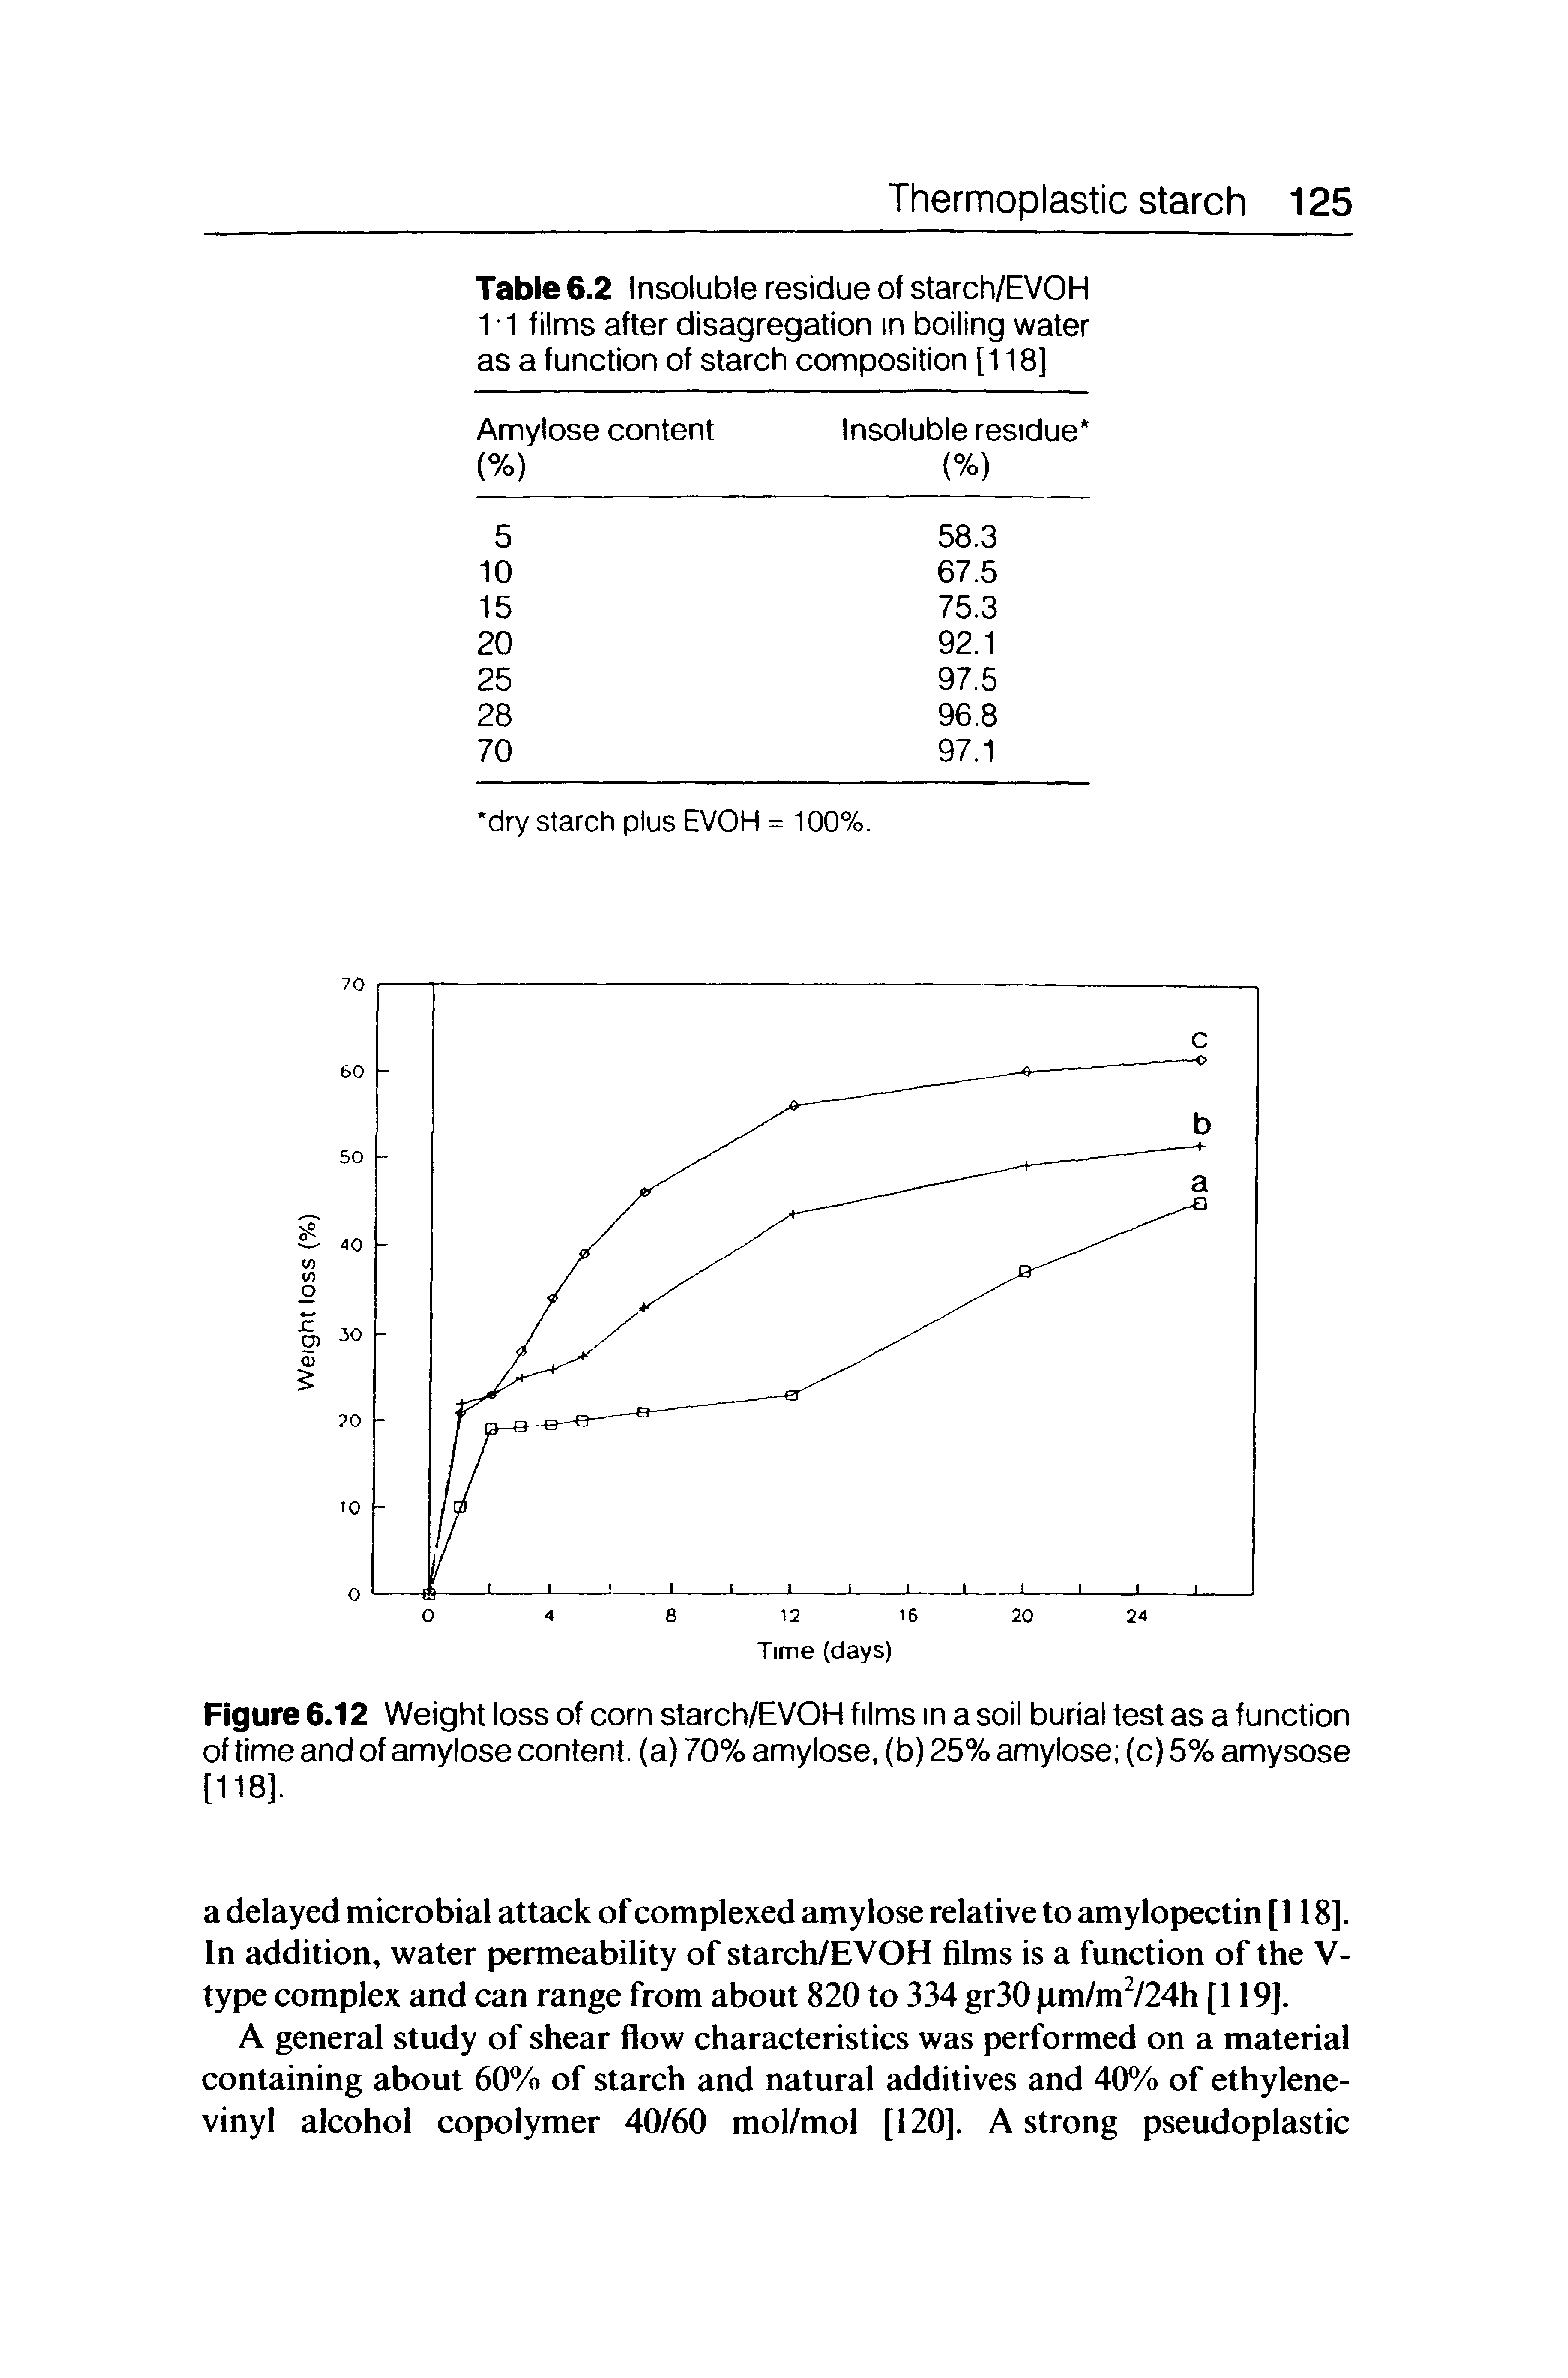 Figure 6.12 Weight loss of corn starch/EVOH films in a soil burial test as a function of time and of amylose content, (a) 70% amylose, (b) 25% amylose (c) 5% amysose [118].